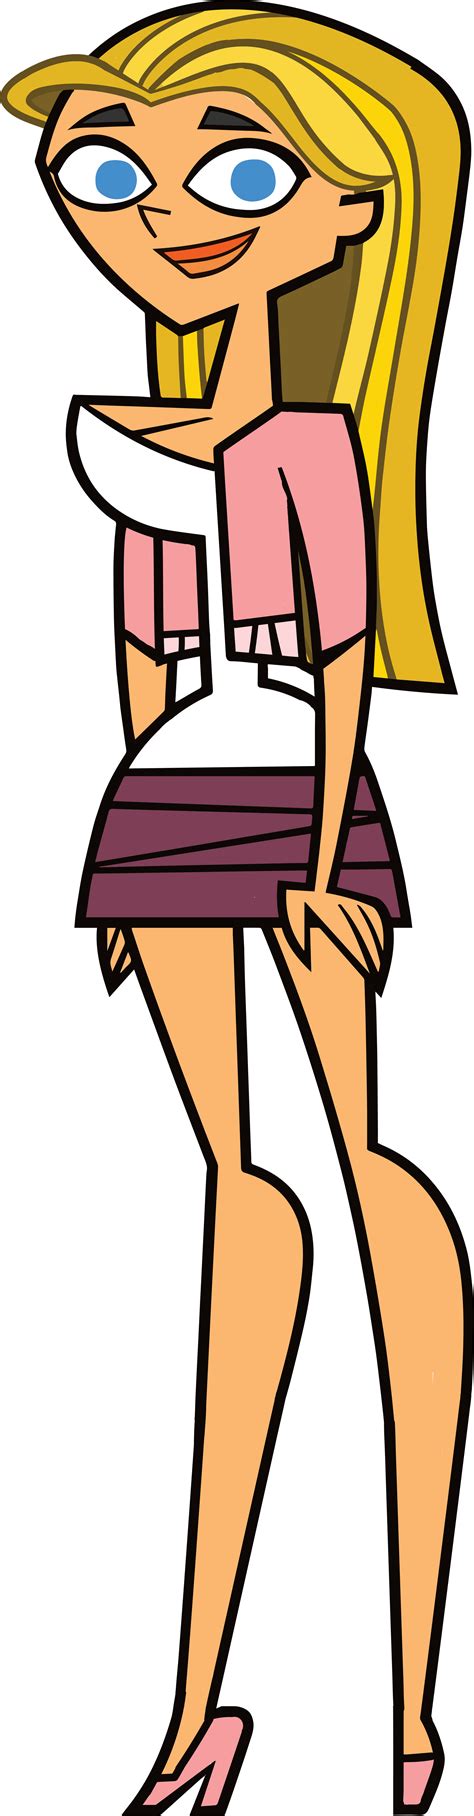 Details. File Size: 2325KB. Duration: 4.300 sec. Dimensions: 498x280. Created: 7/20/2020, 4:53:17 PM. The perfect Total Drama Drama Total Lindsay Tdi Animated GIF for your conversation. Discover and Share the best GIFs on Tenor.